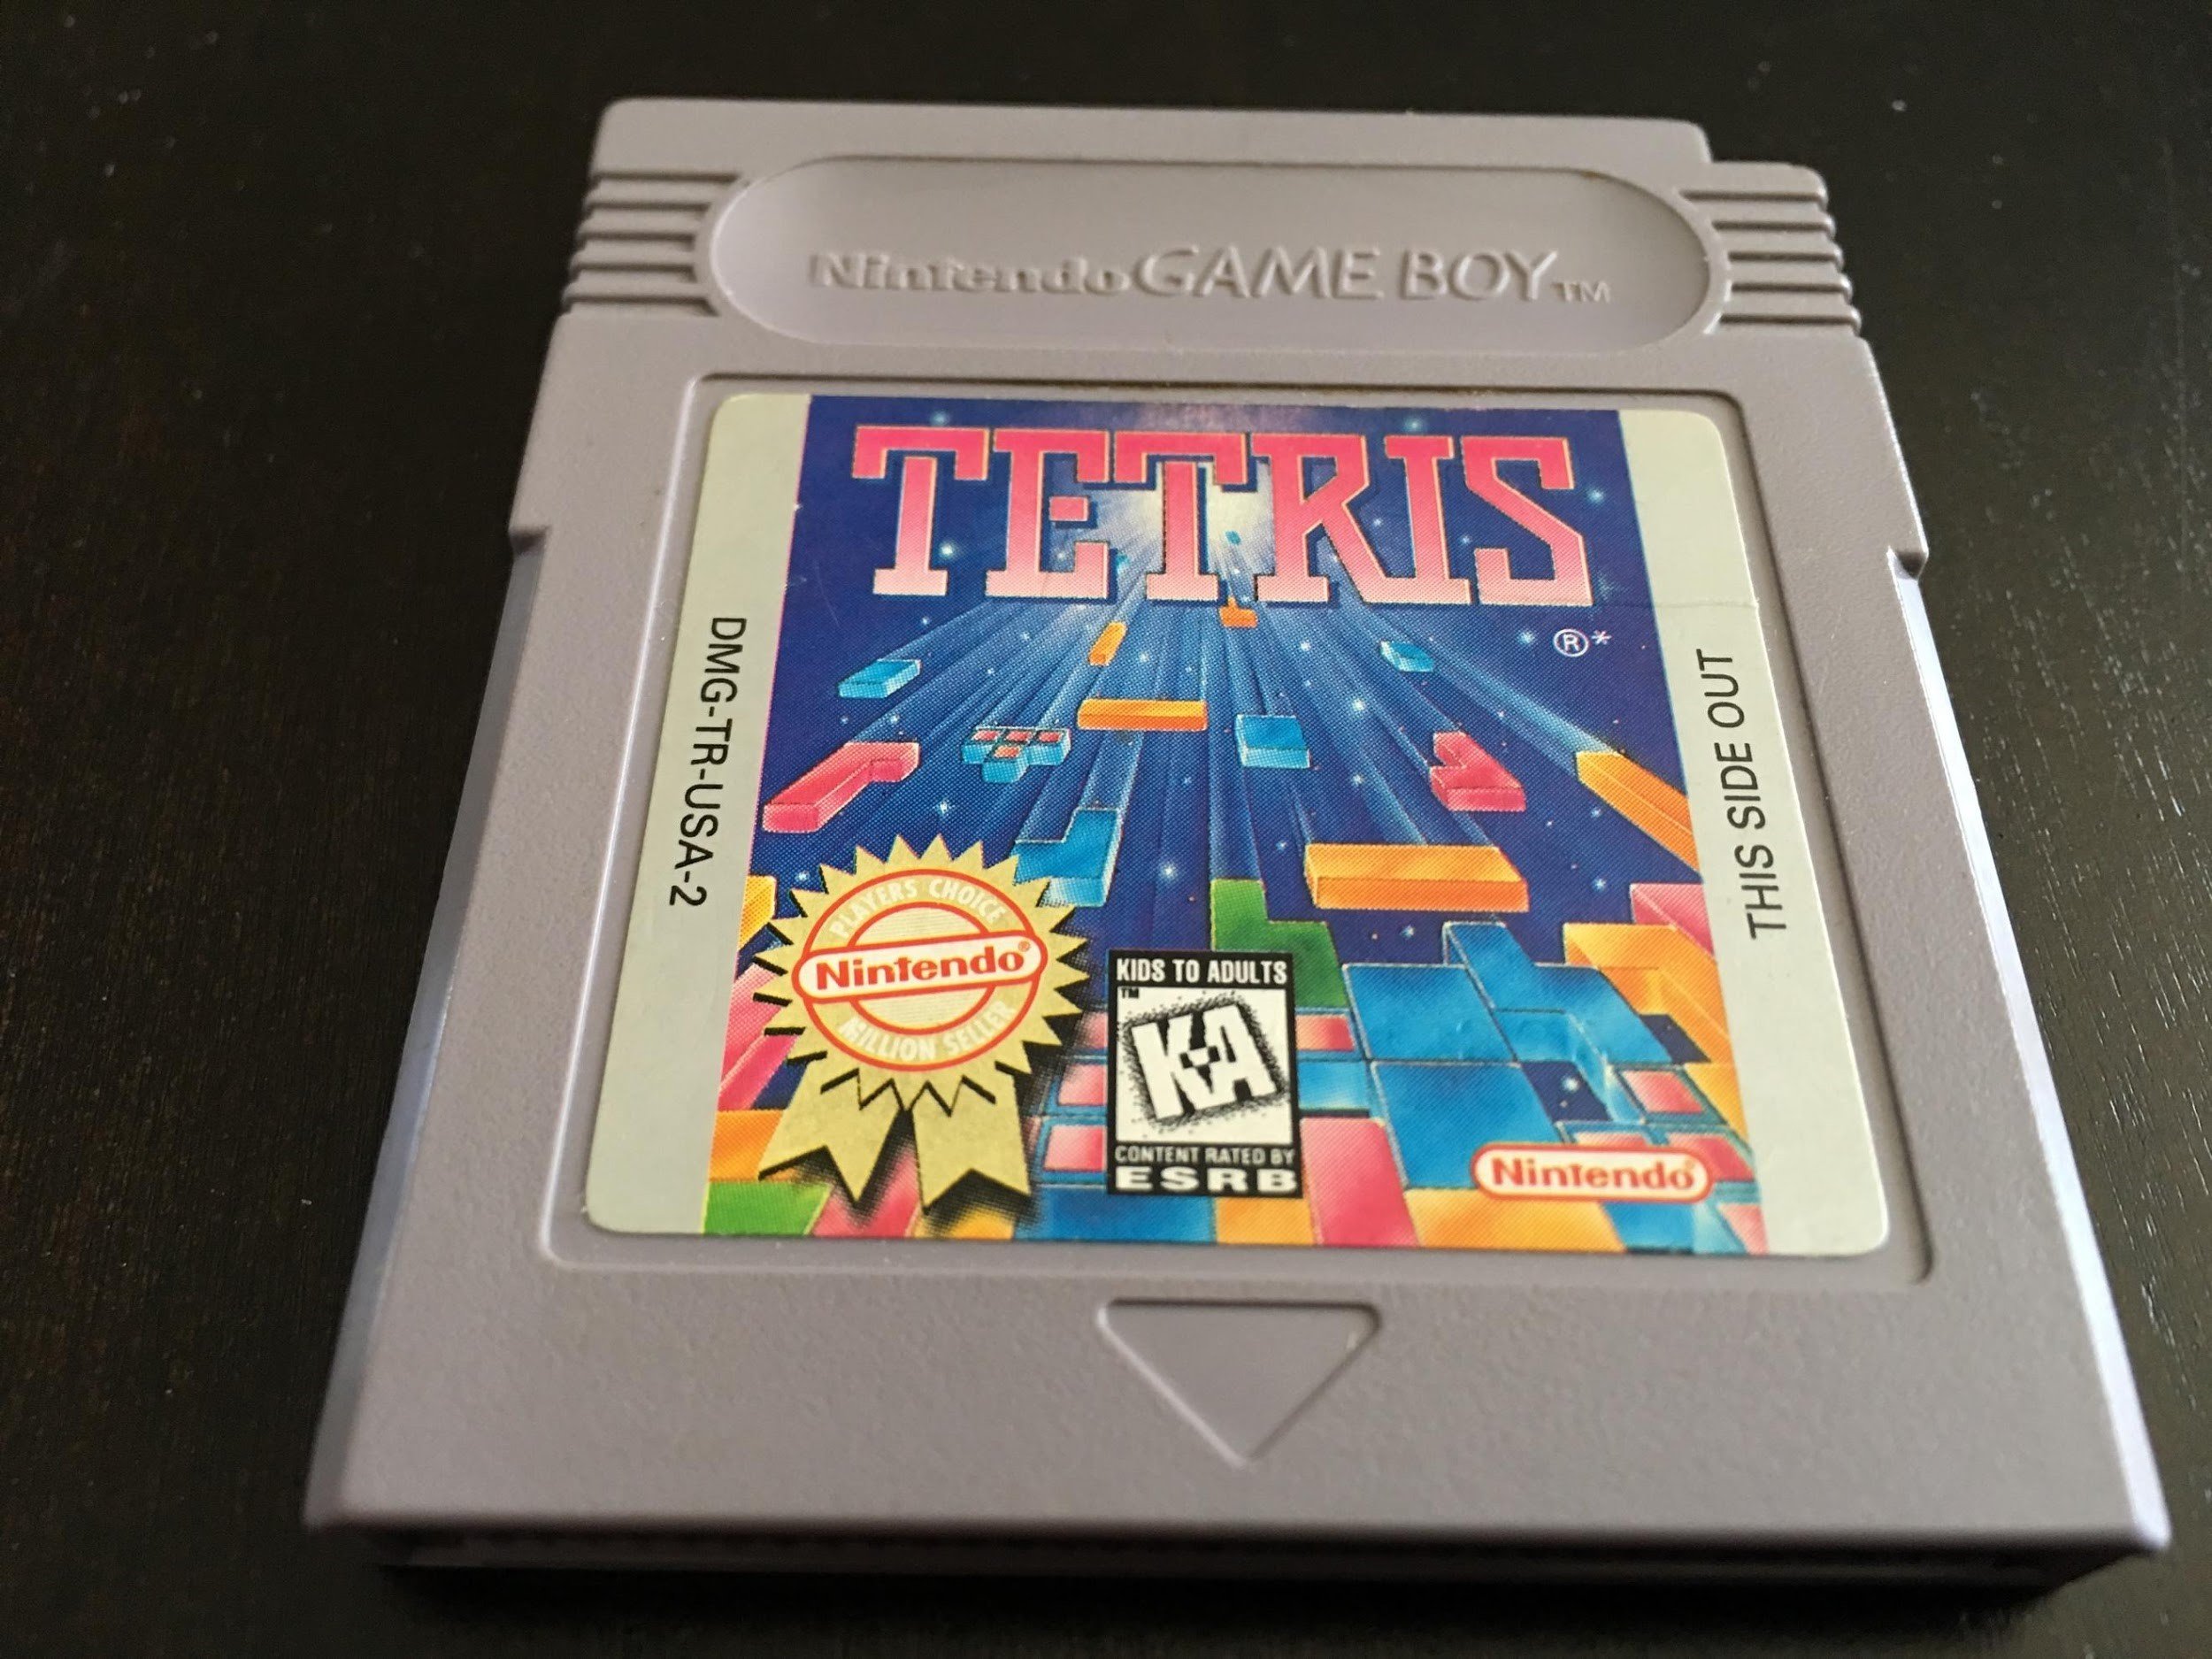 What Was It Like to Play Tetris on the Game Boy? 